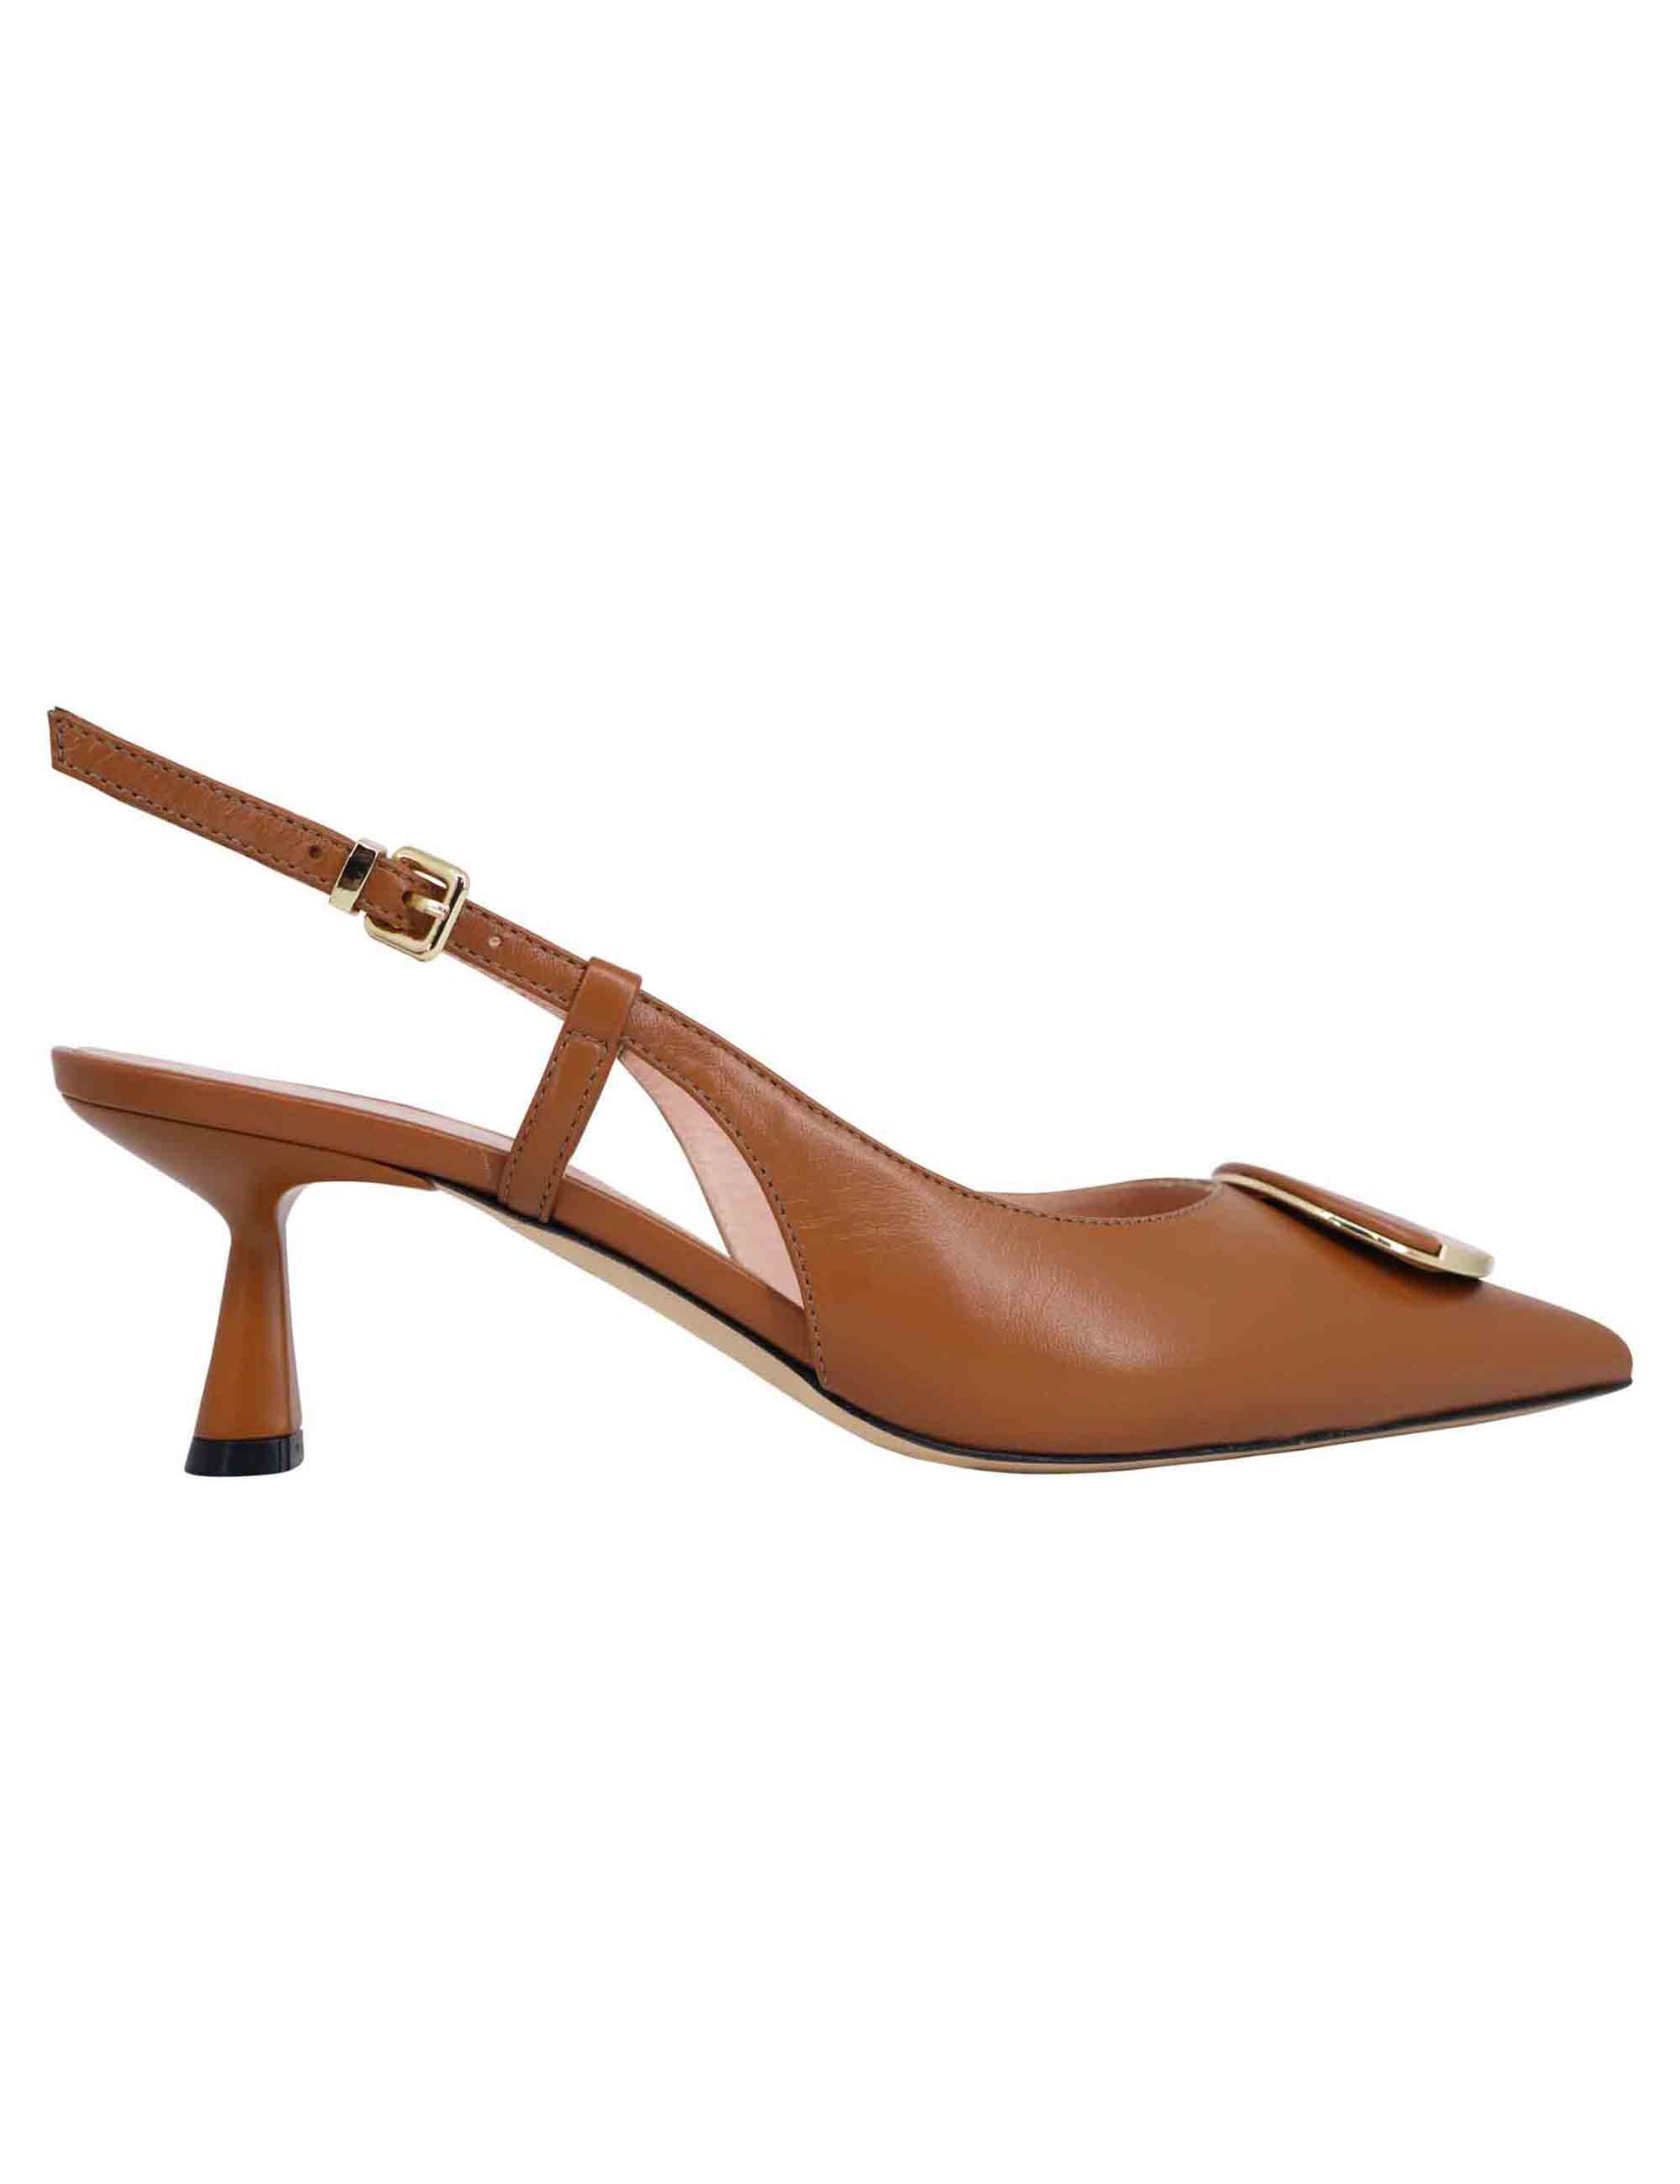 Women's slingback pumps in tan leather with low heel and gold buckle